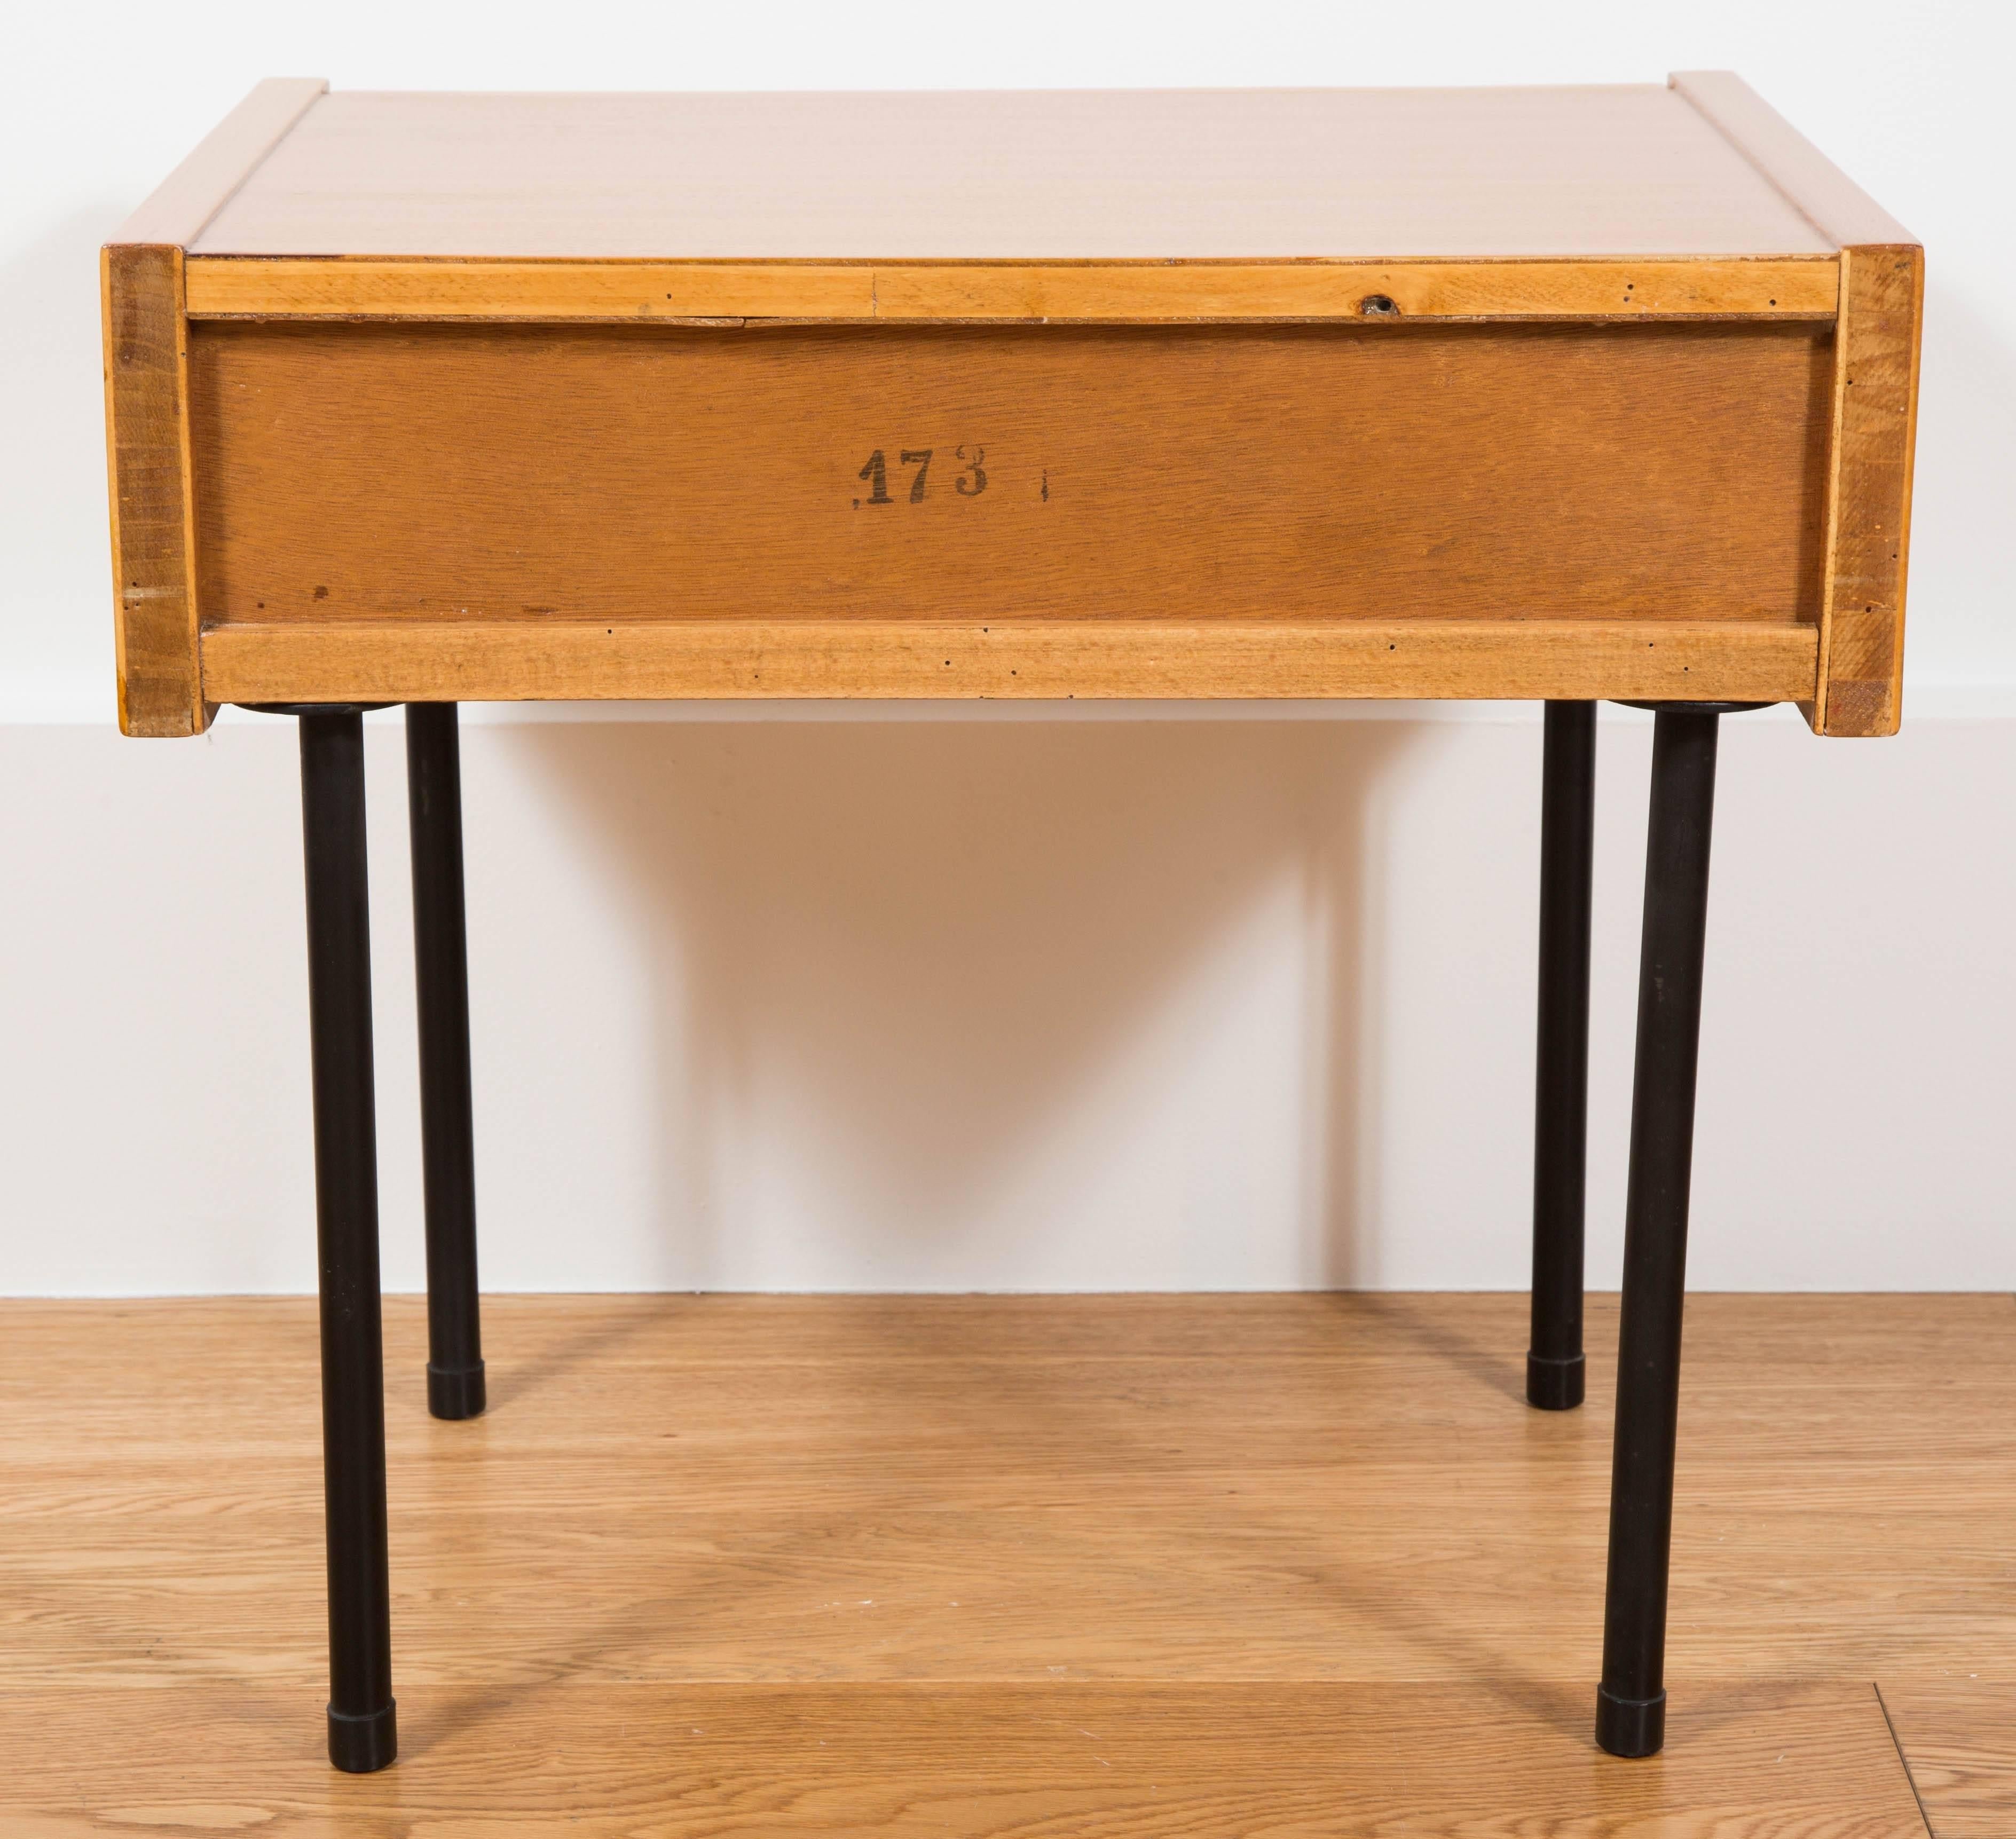 Elm Pair of Bedside Tables 134 by André Simard, Meubles TV Edition, 1953